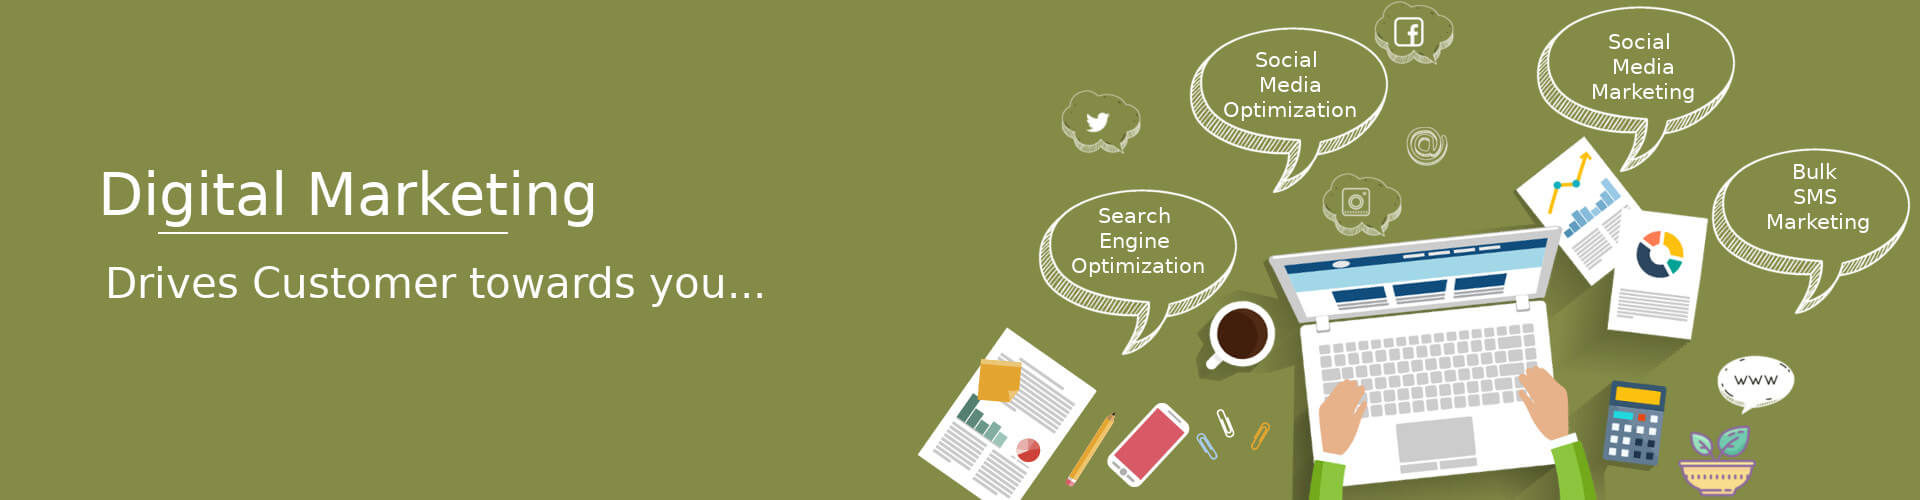 Archeet Infotech: Reliable Search Engine Optimisation service provider company in Pune, Maharastra, India.